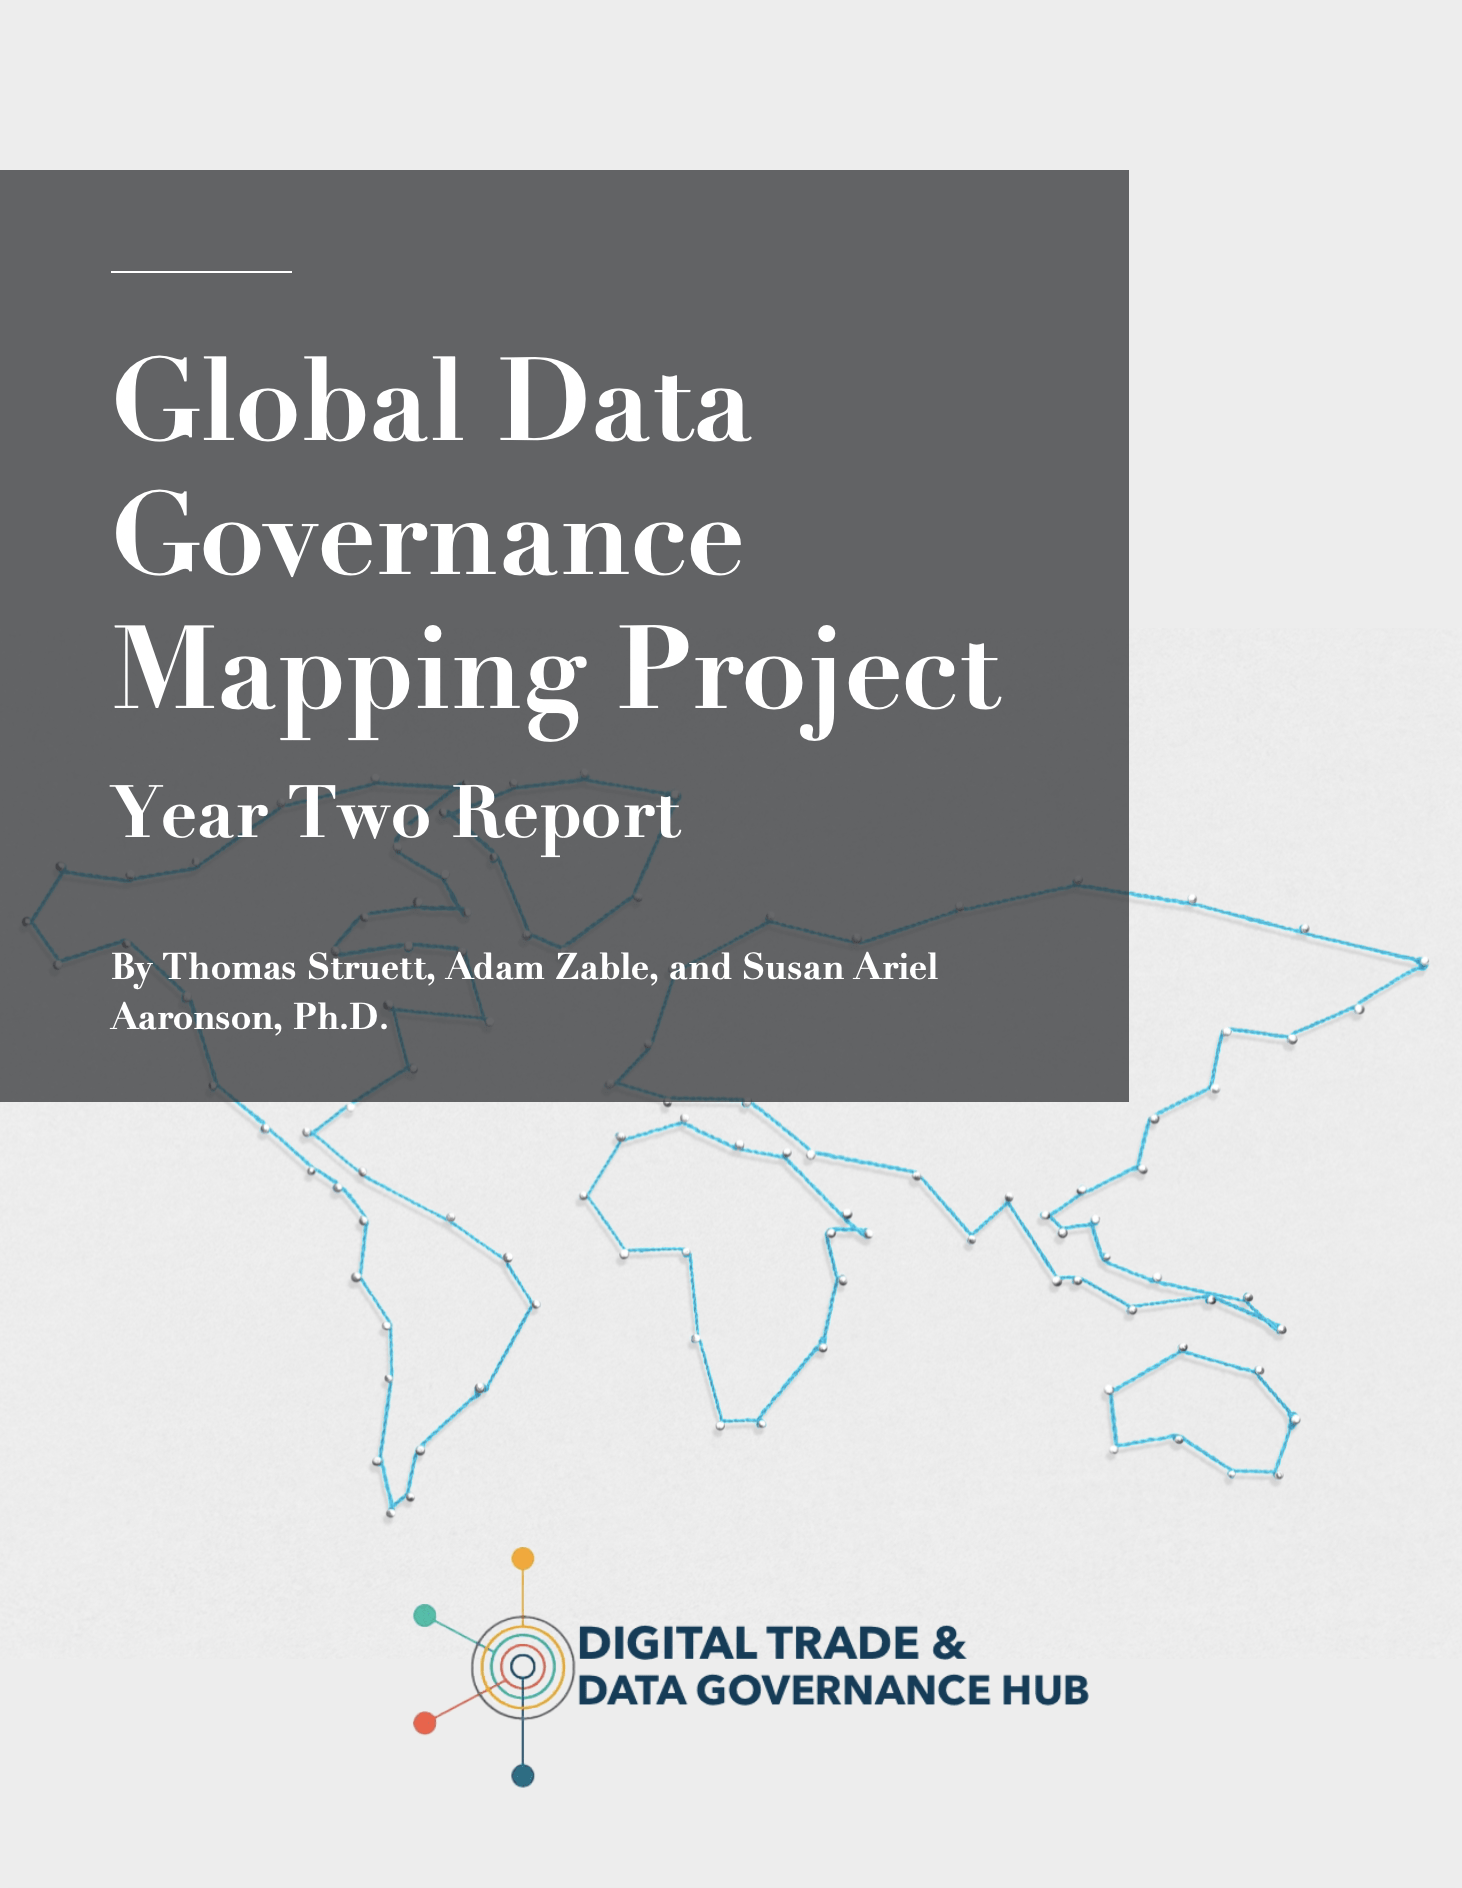 Global Data Governance Mapping Project - Year 2 Report